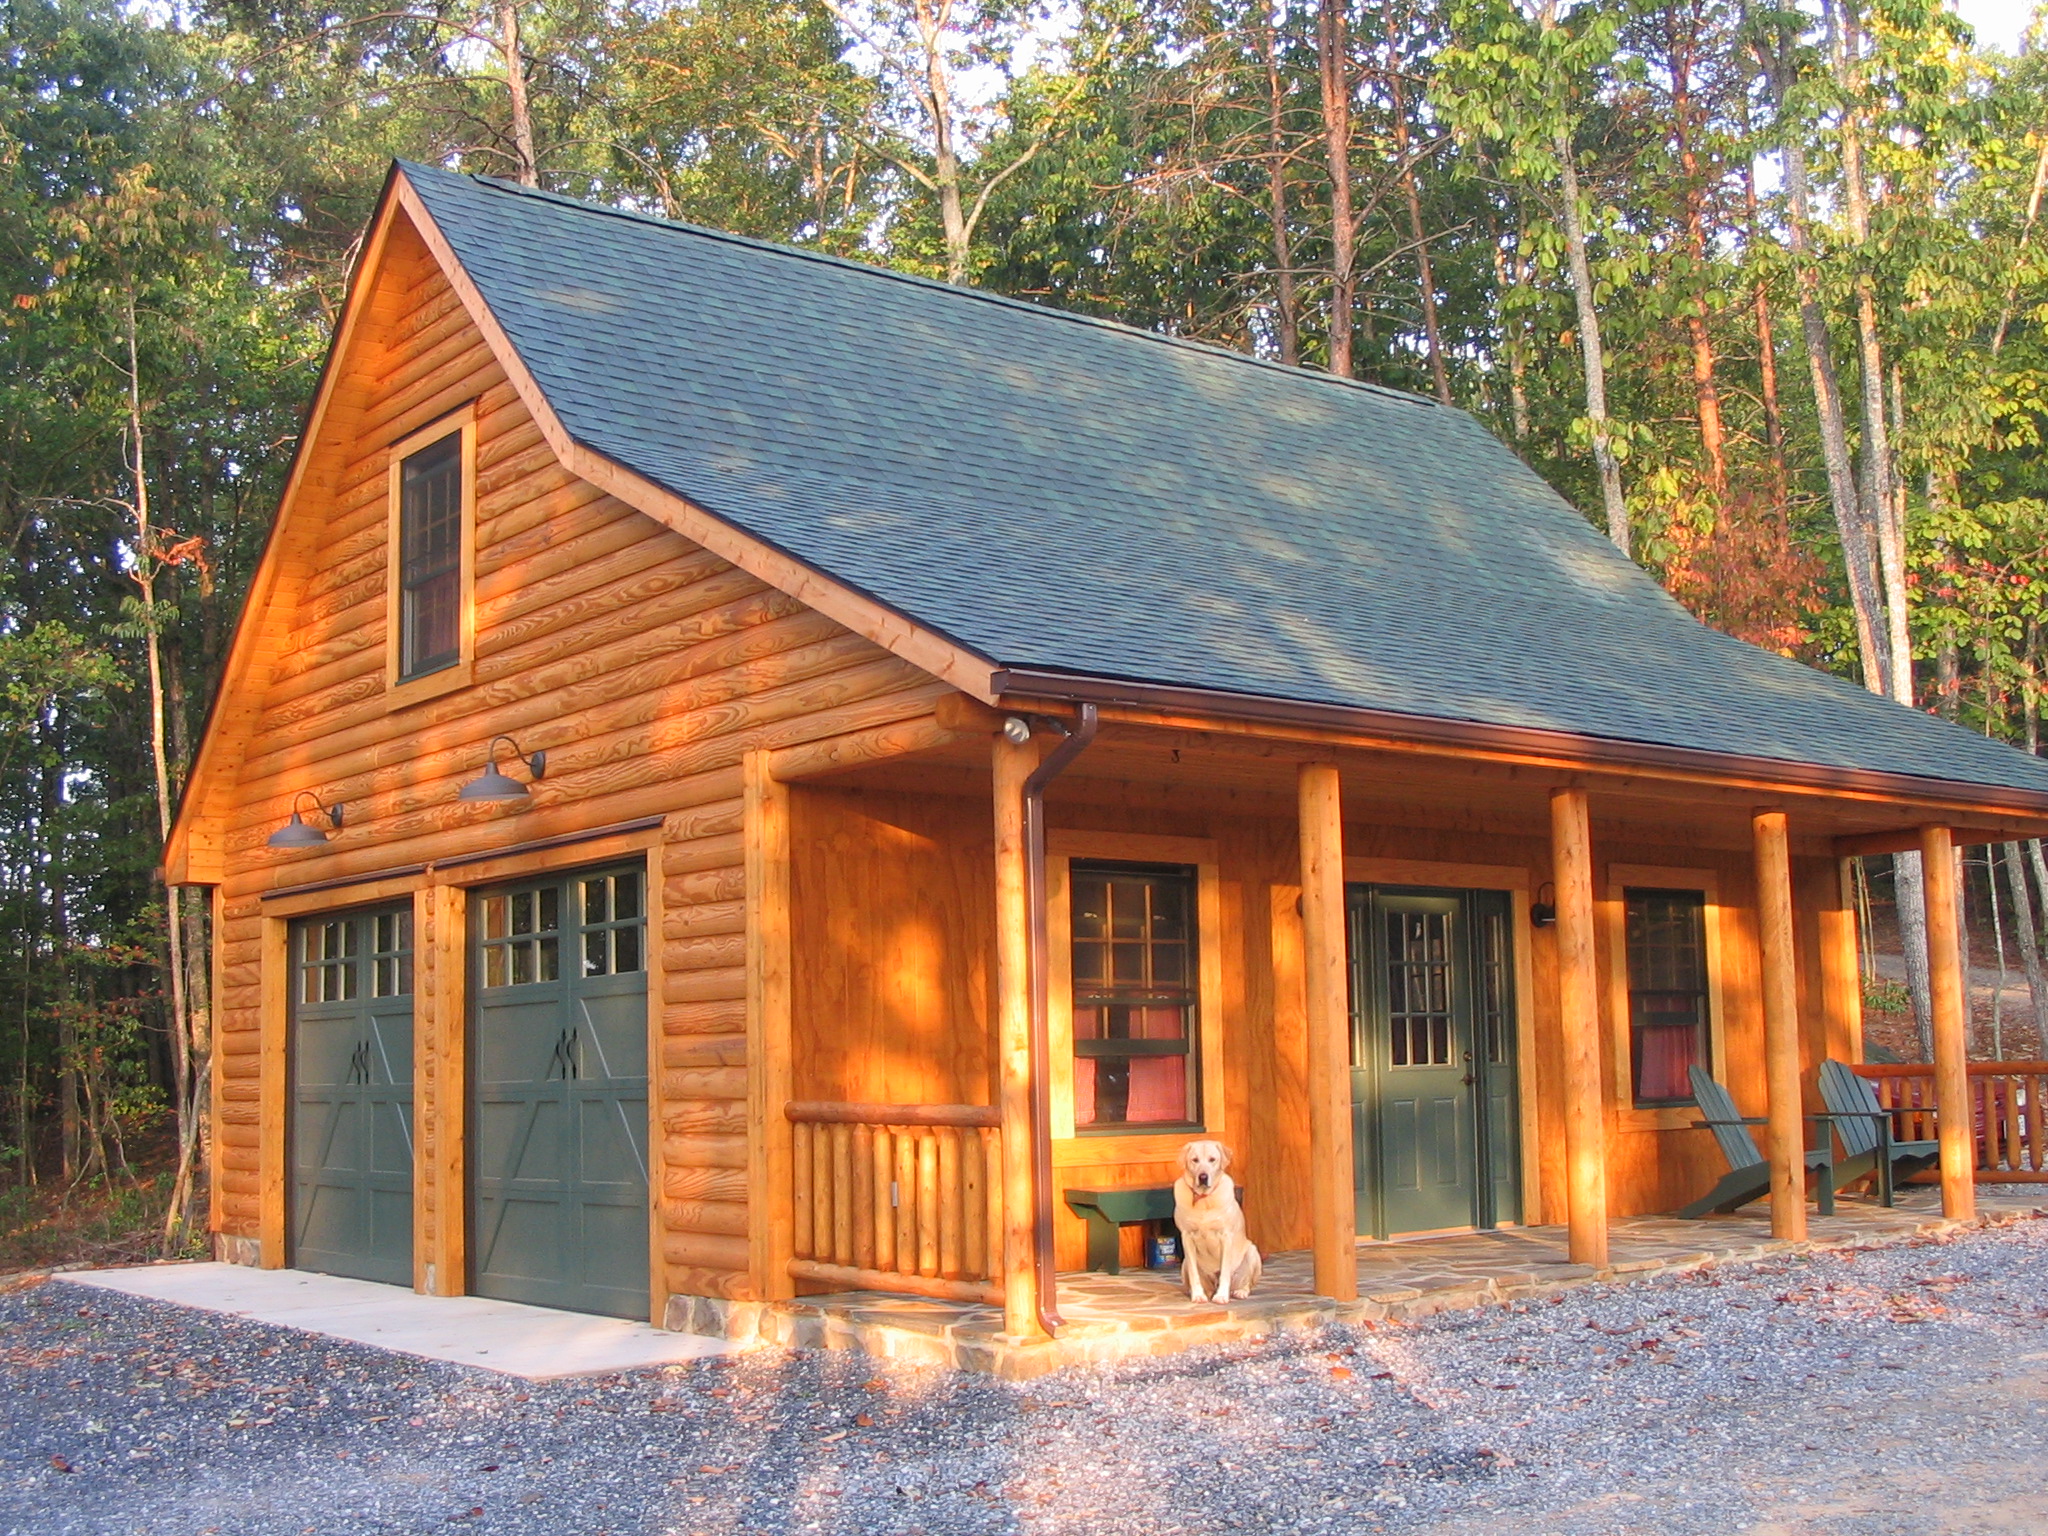 6 Cabin Plans With Garage Ideas To Remind Us The Most